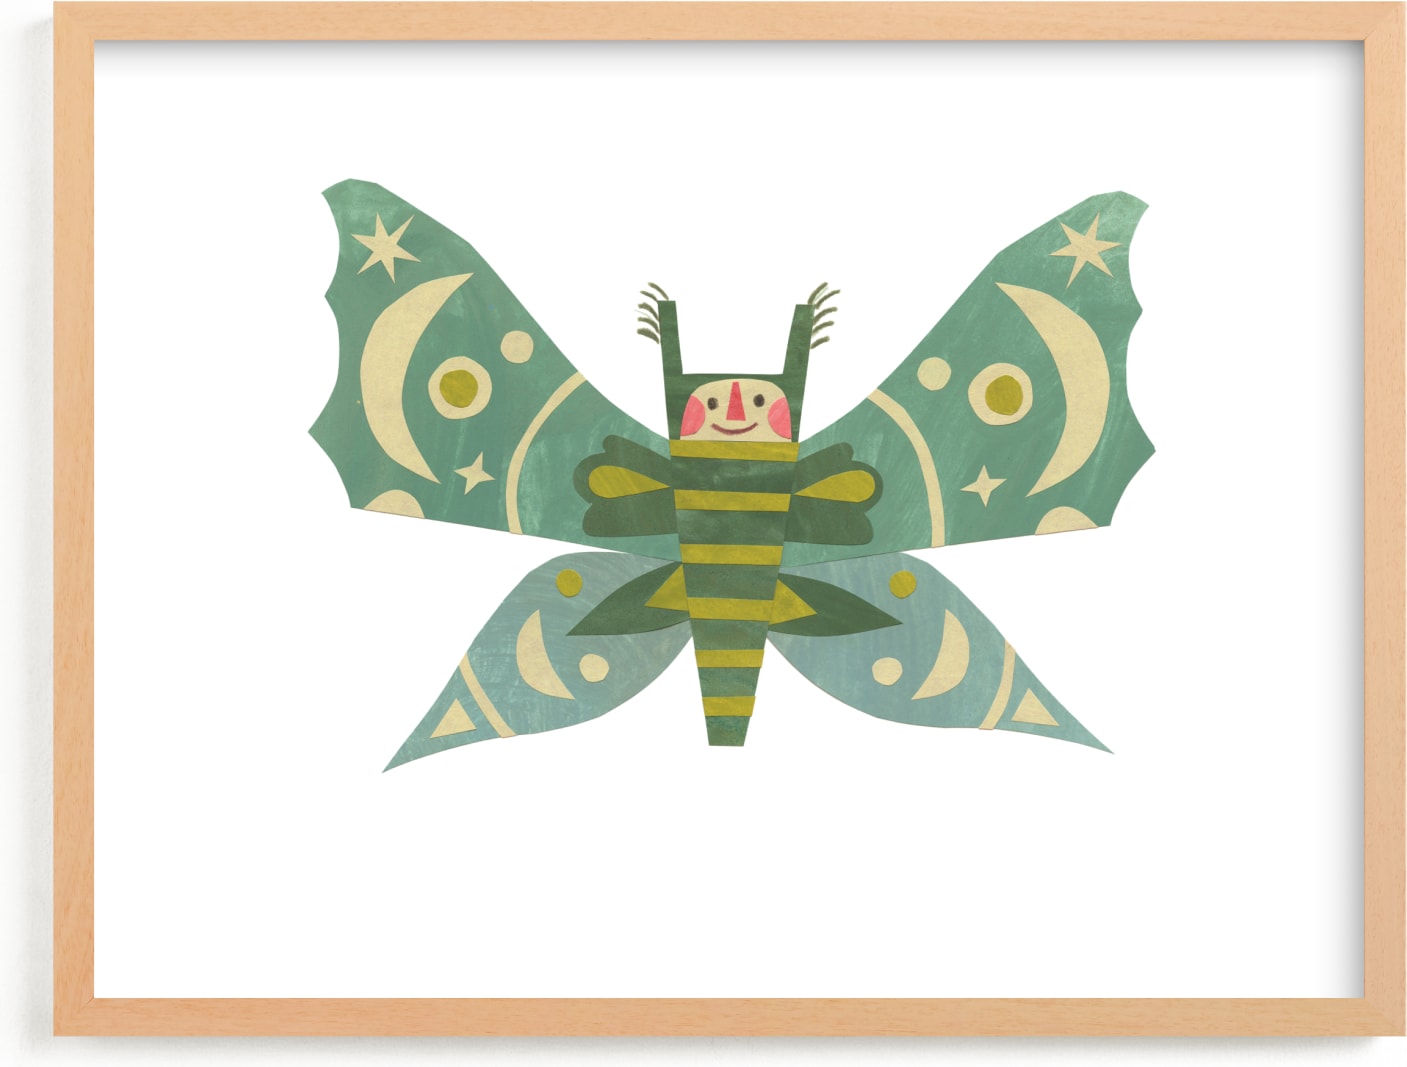 This is a blue, ivory, green kids wall art by Sarah Hand called Midnight Moth.